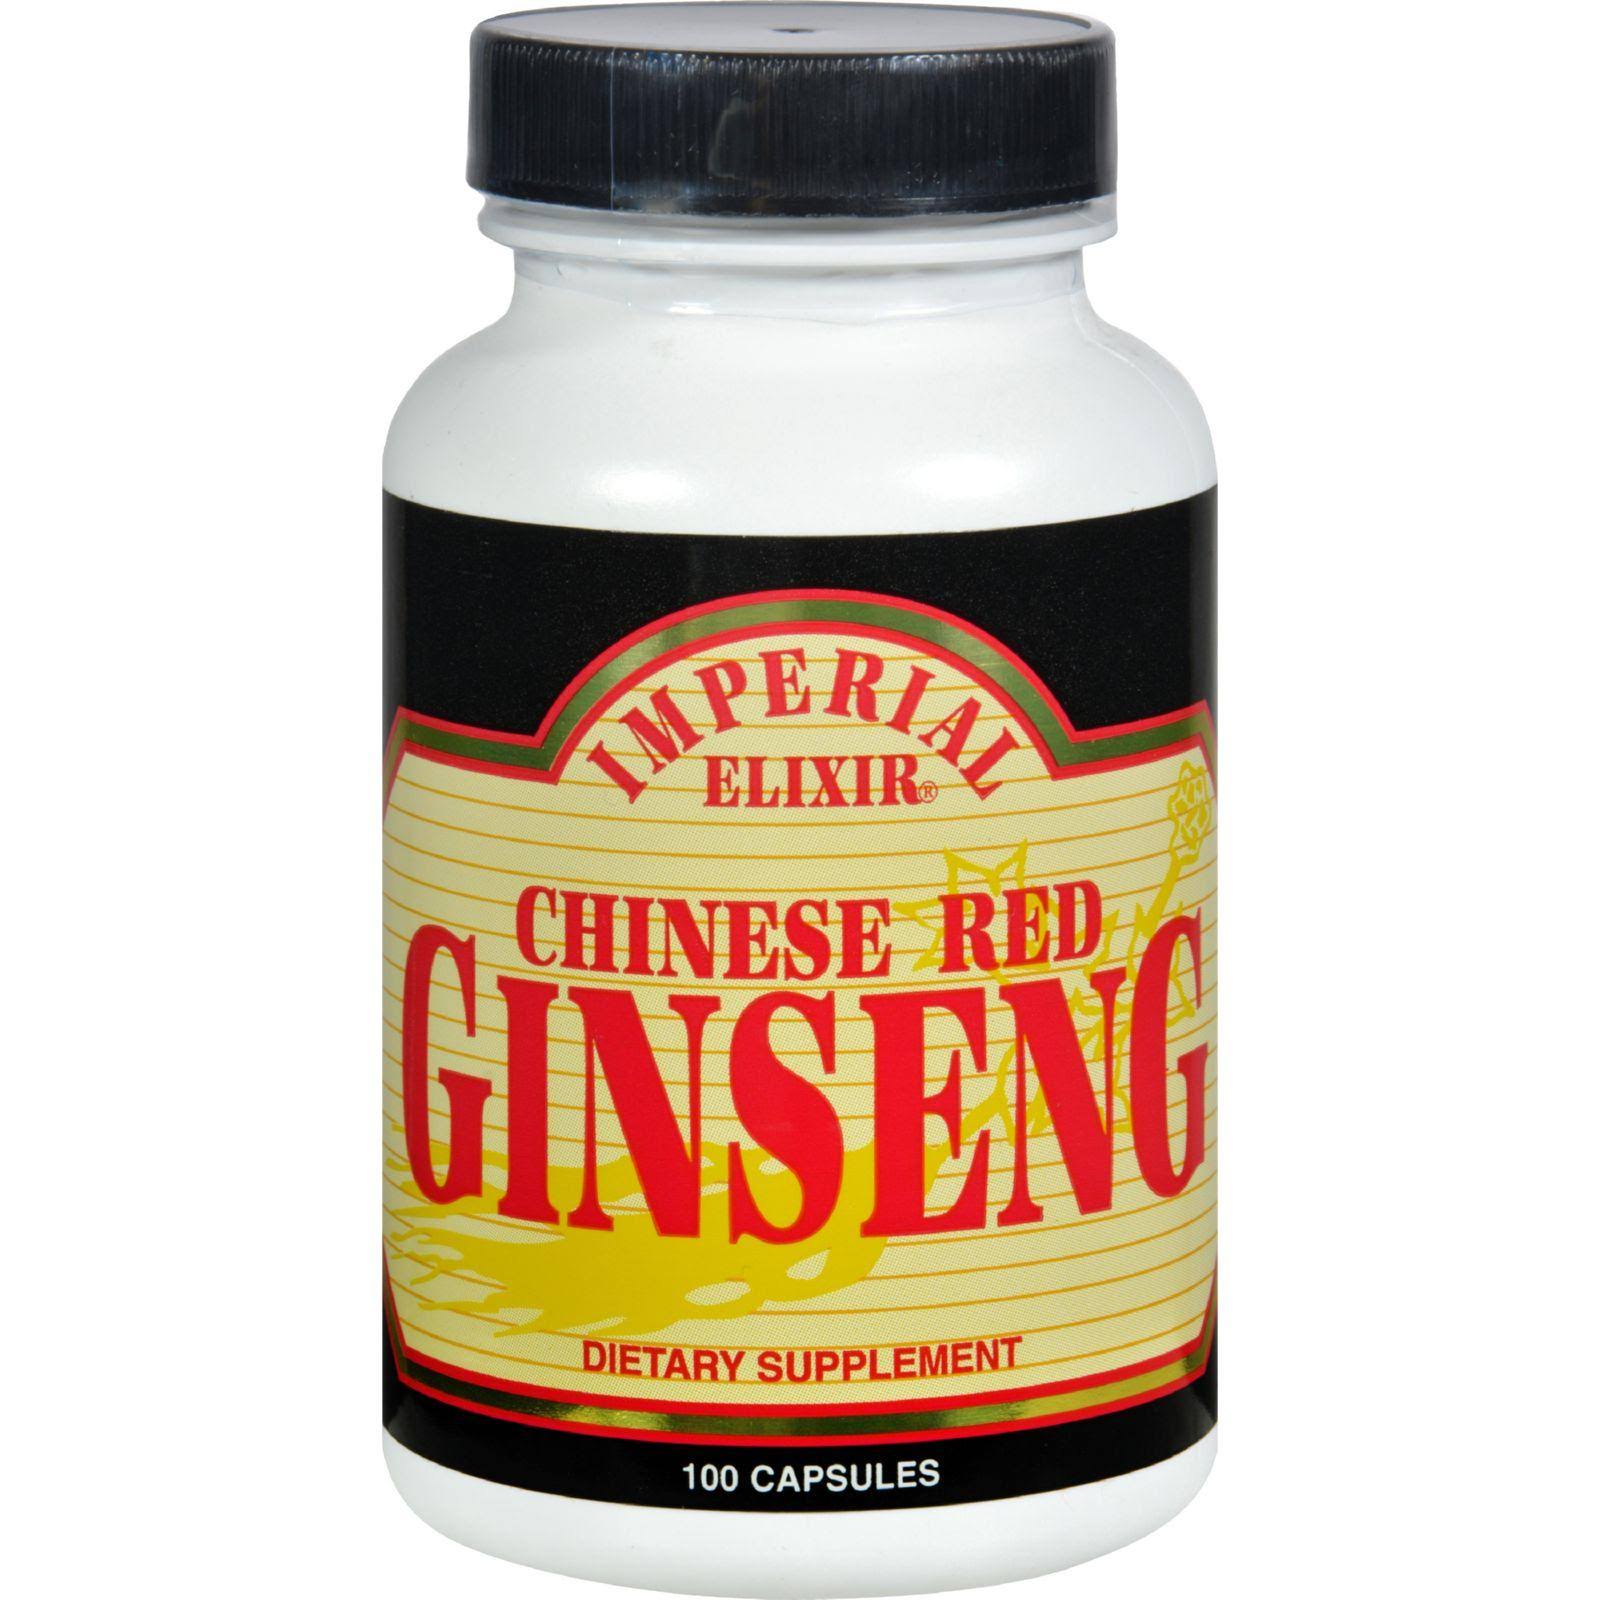 Imperial Elixir Chinese Red Ginseng Supplement - 100 Capsules